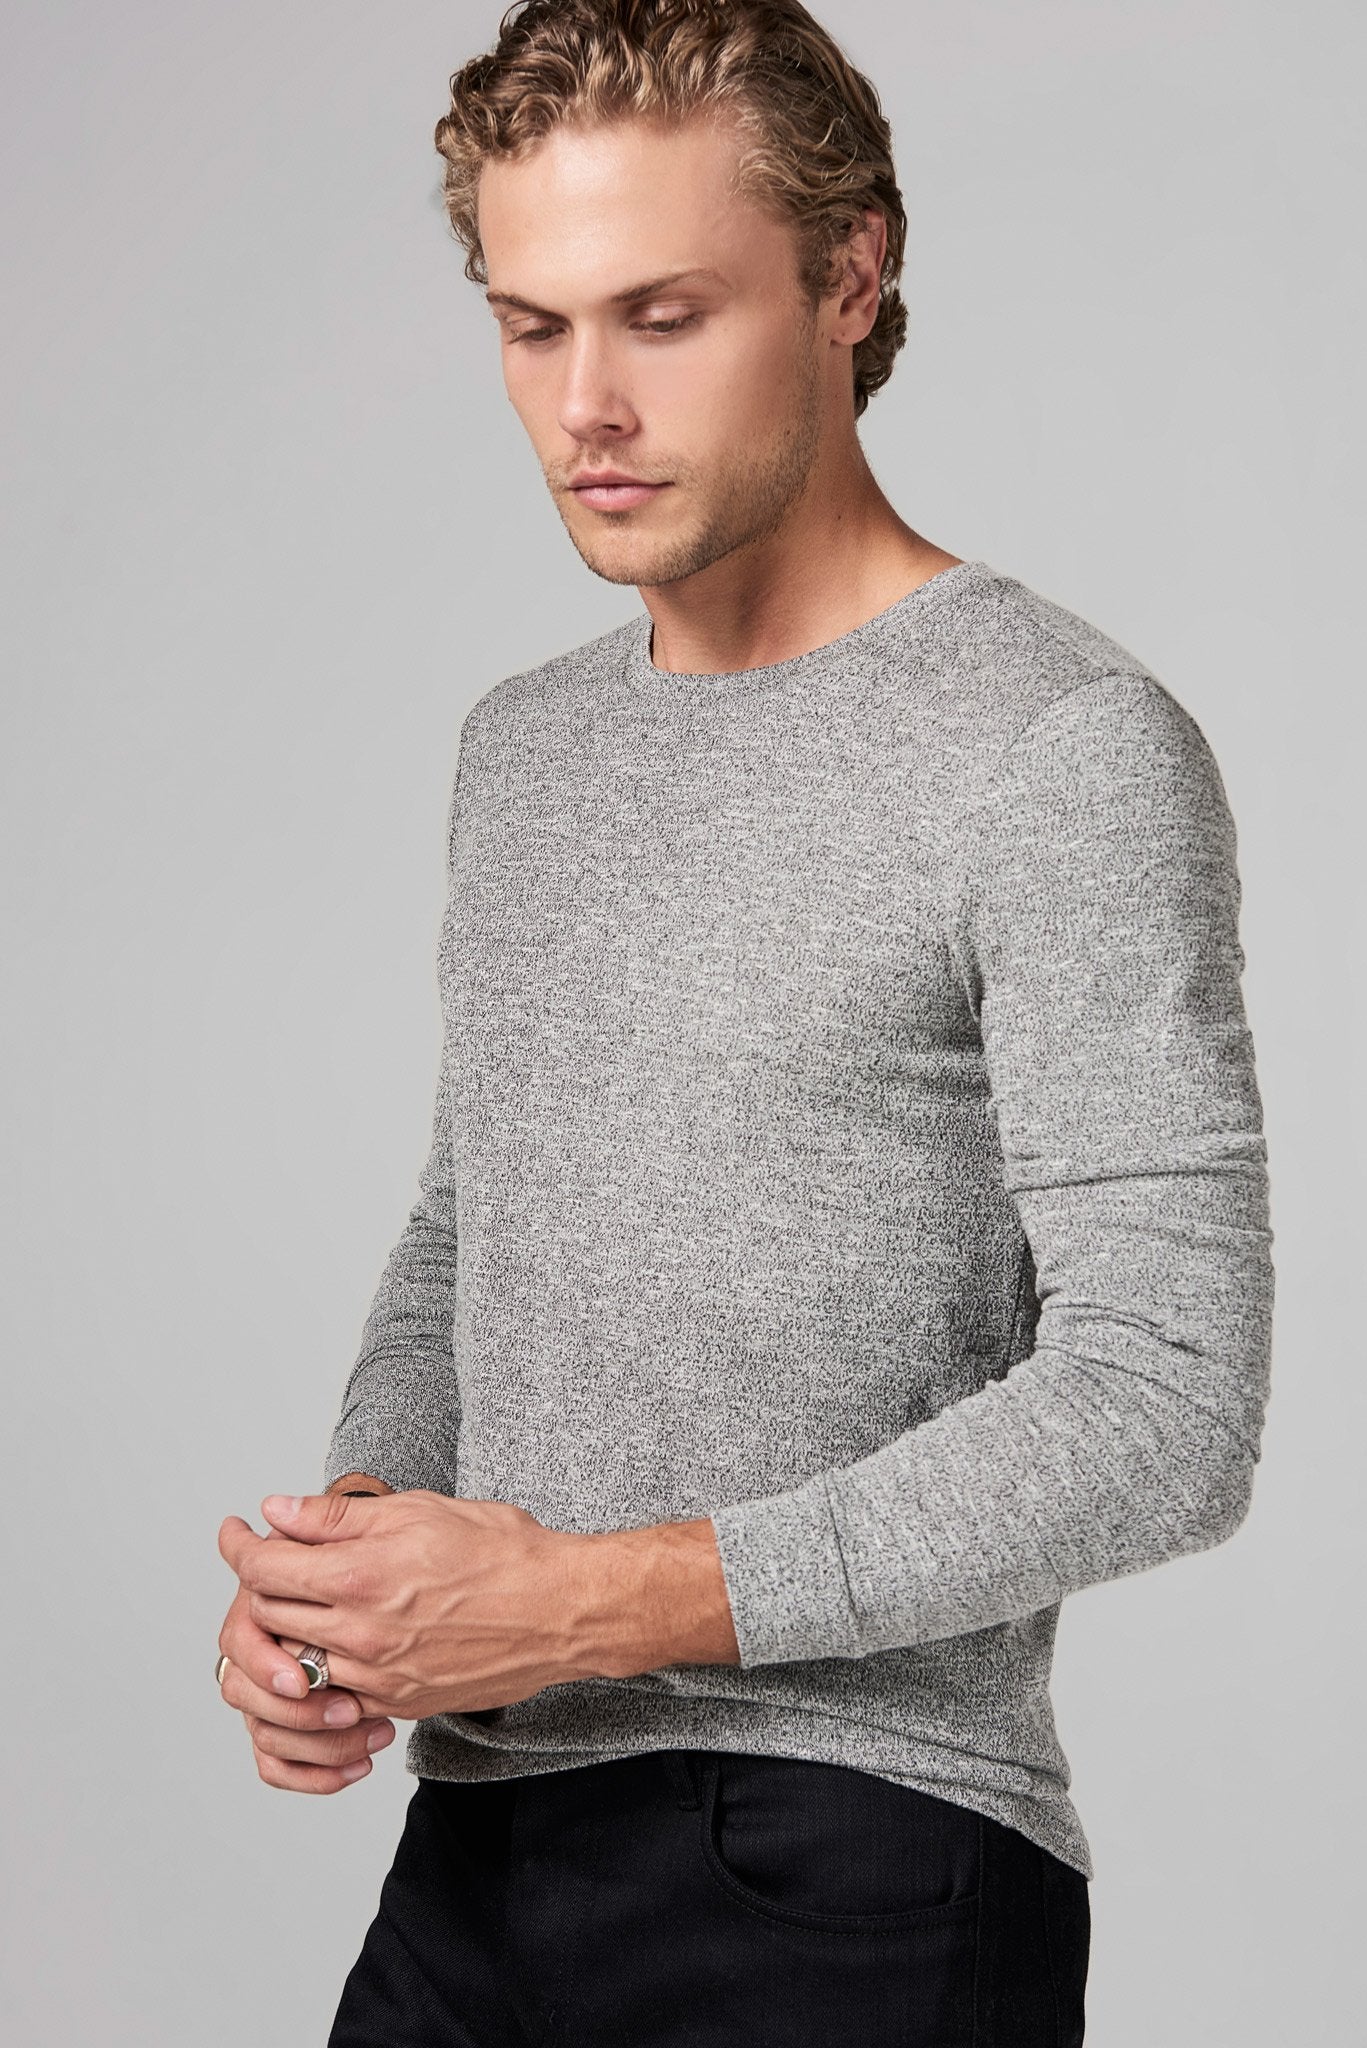 Men's Novelty Texture Long Sleeve Pullover – Mika Jaymes